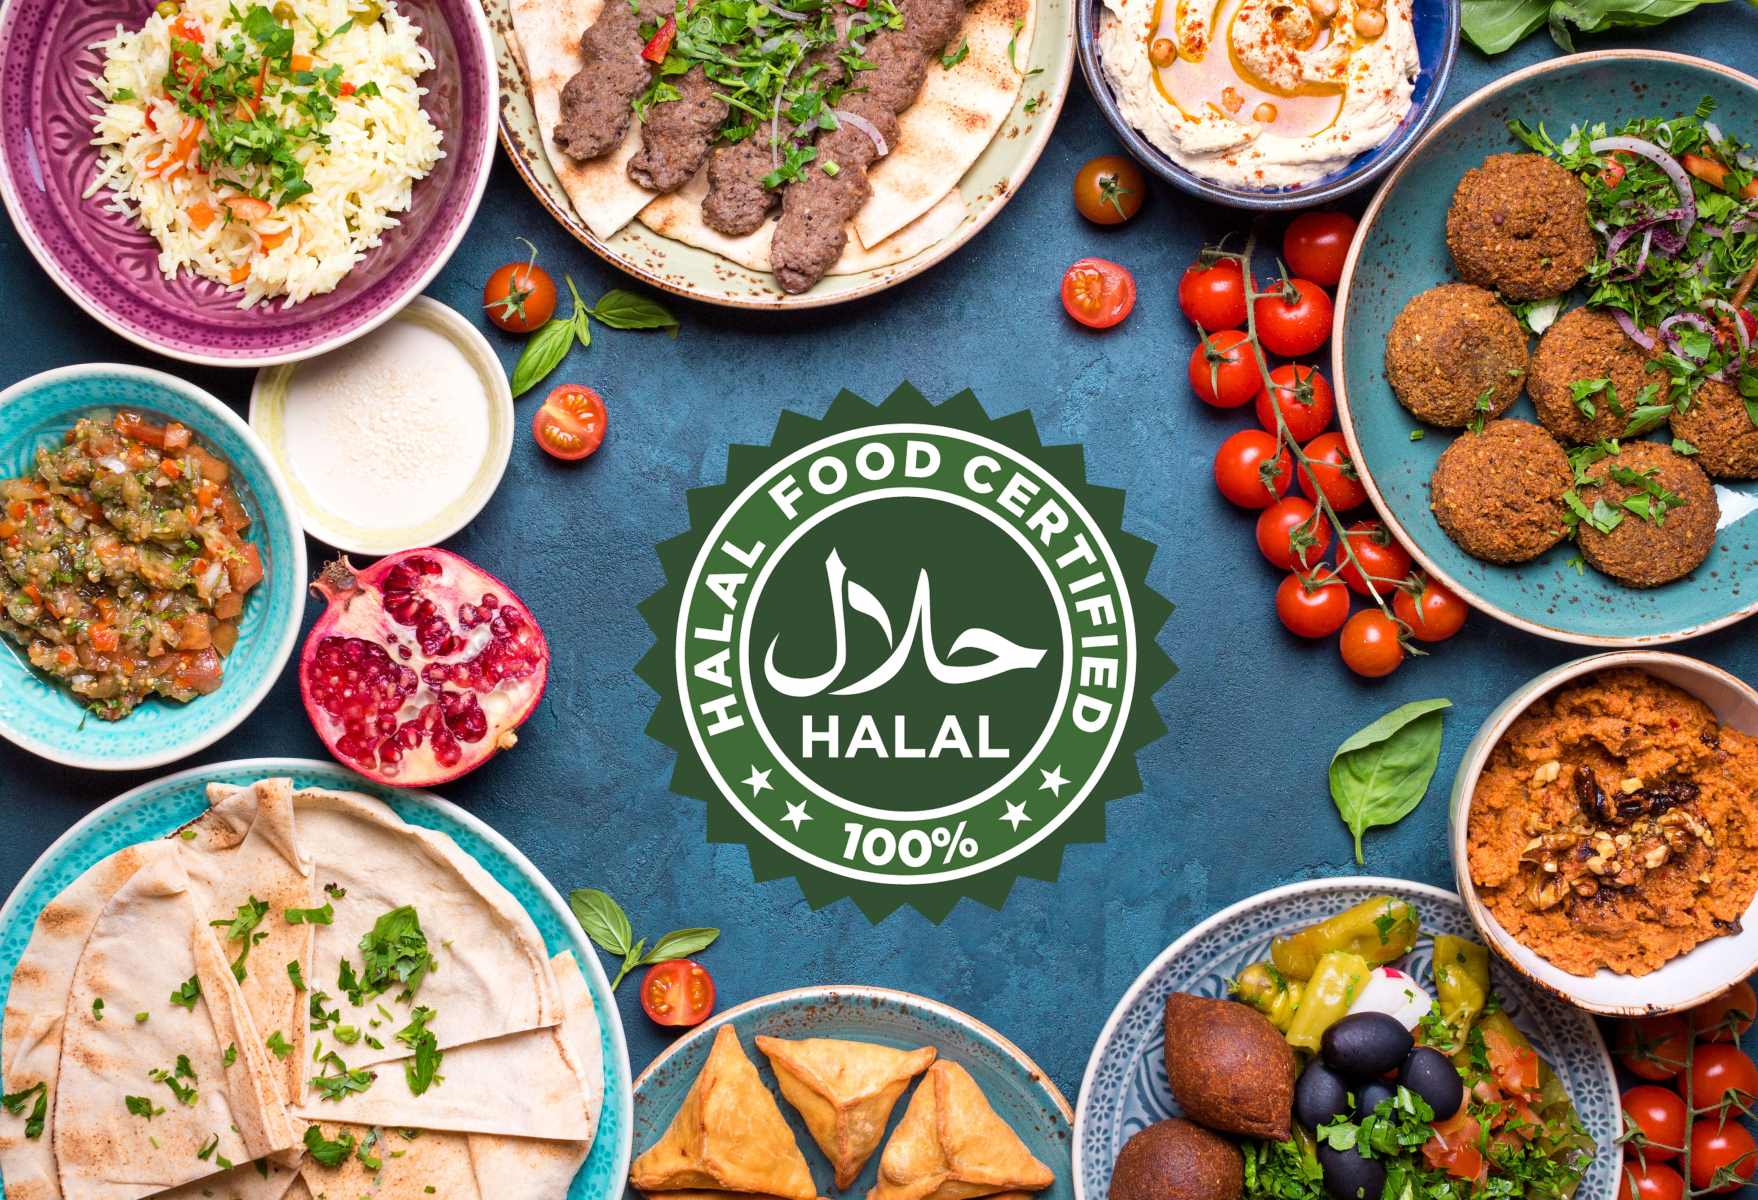 The Truth About E635 Halal Certification